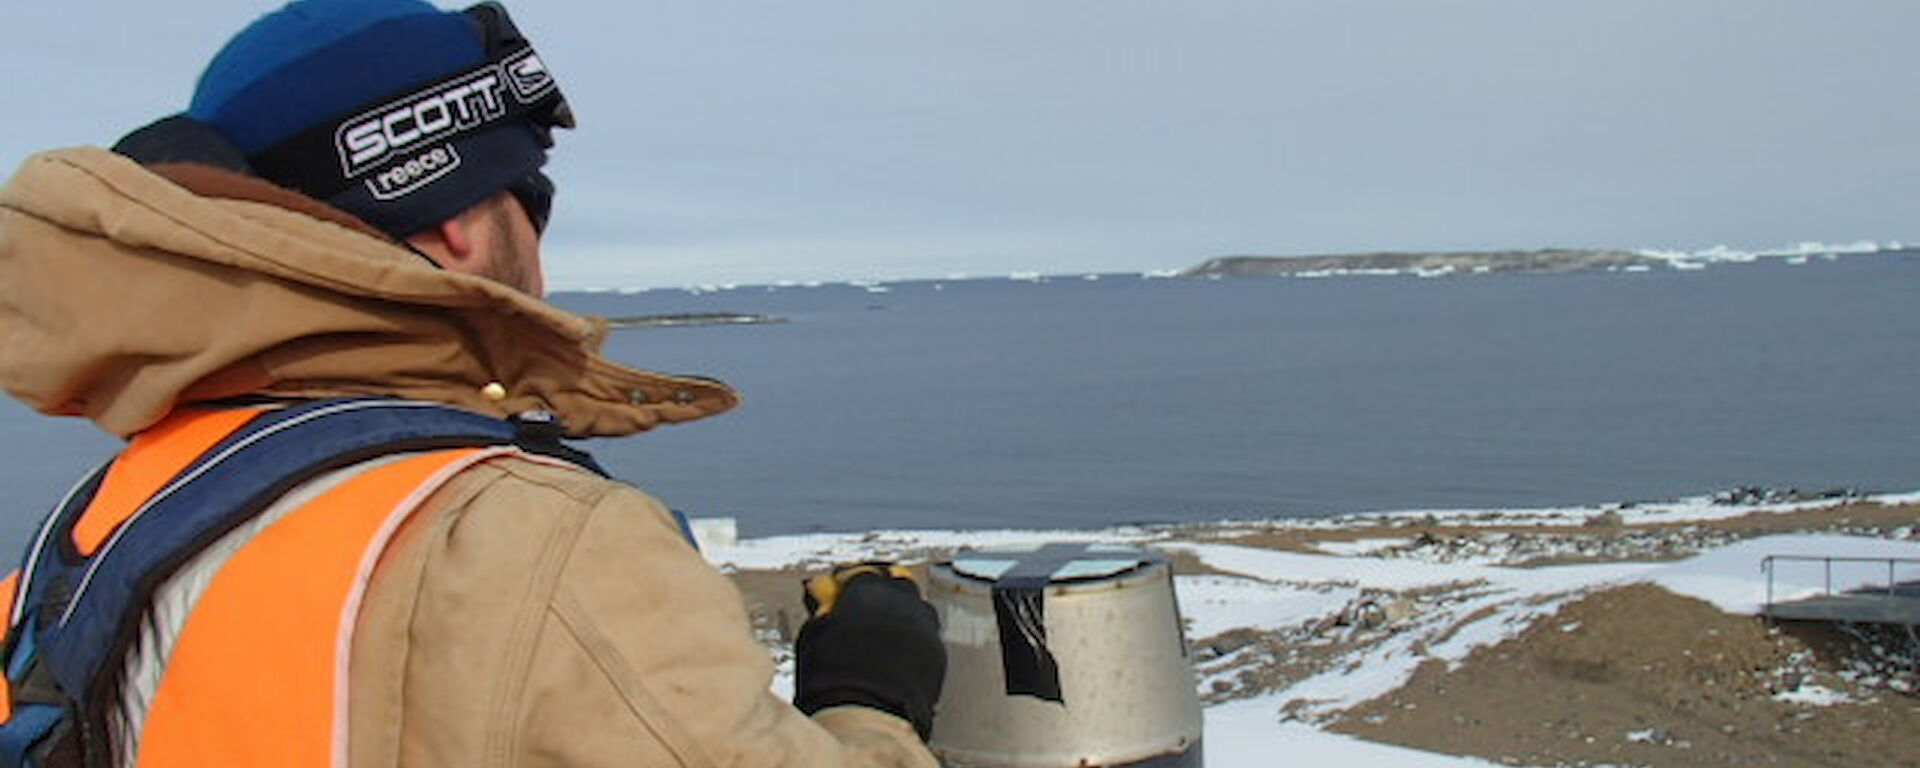 Paul taping a cover on an exhaust vent with ice bergs in the distance.